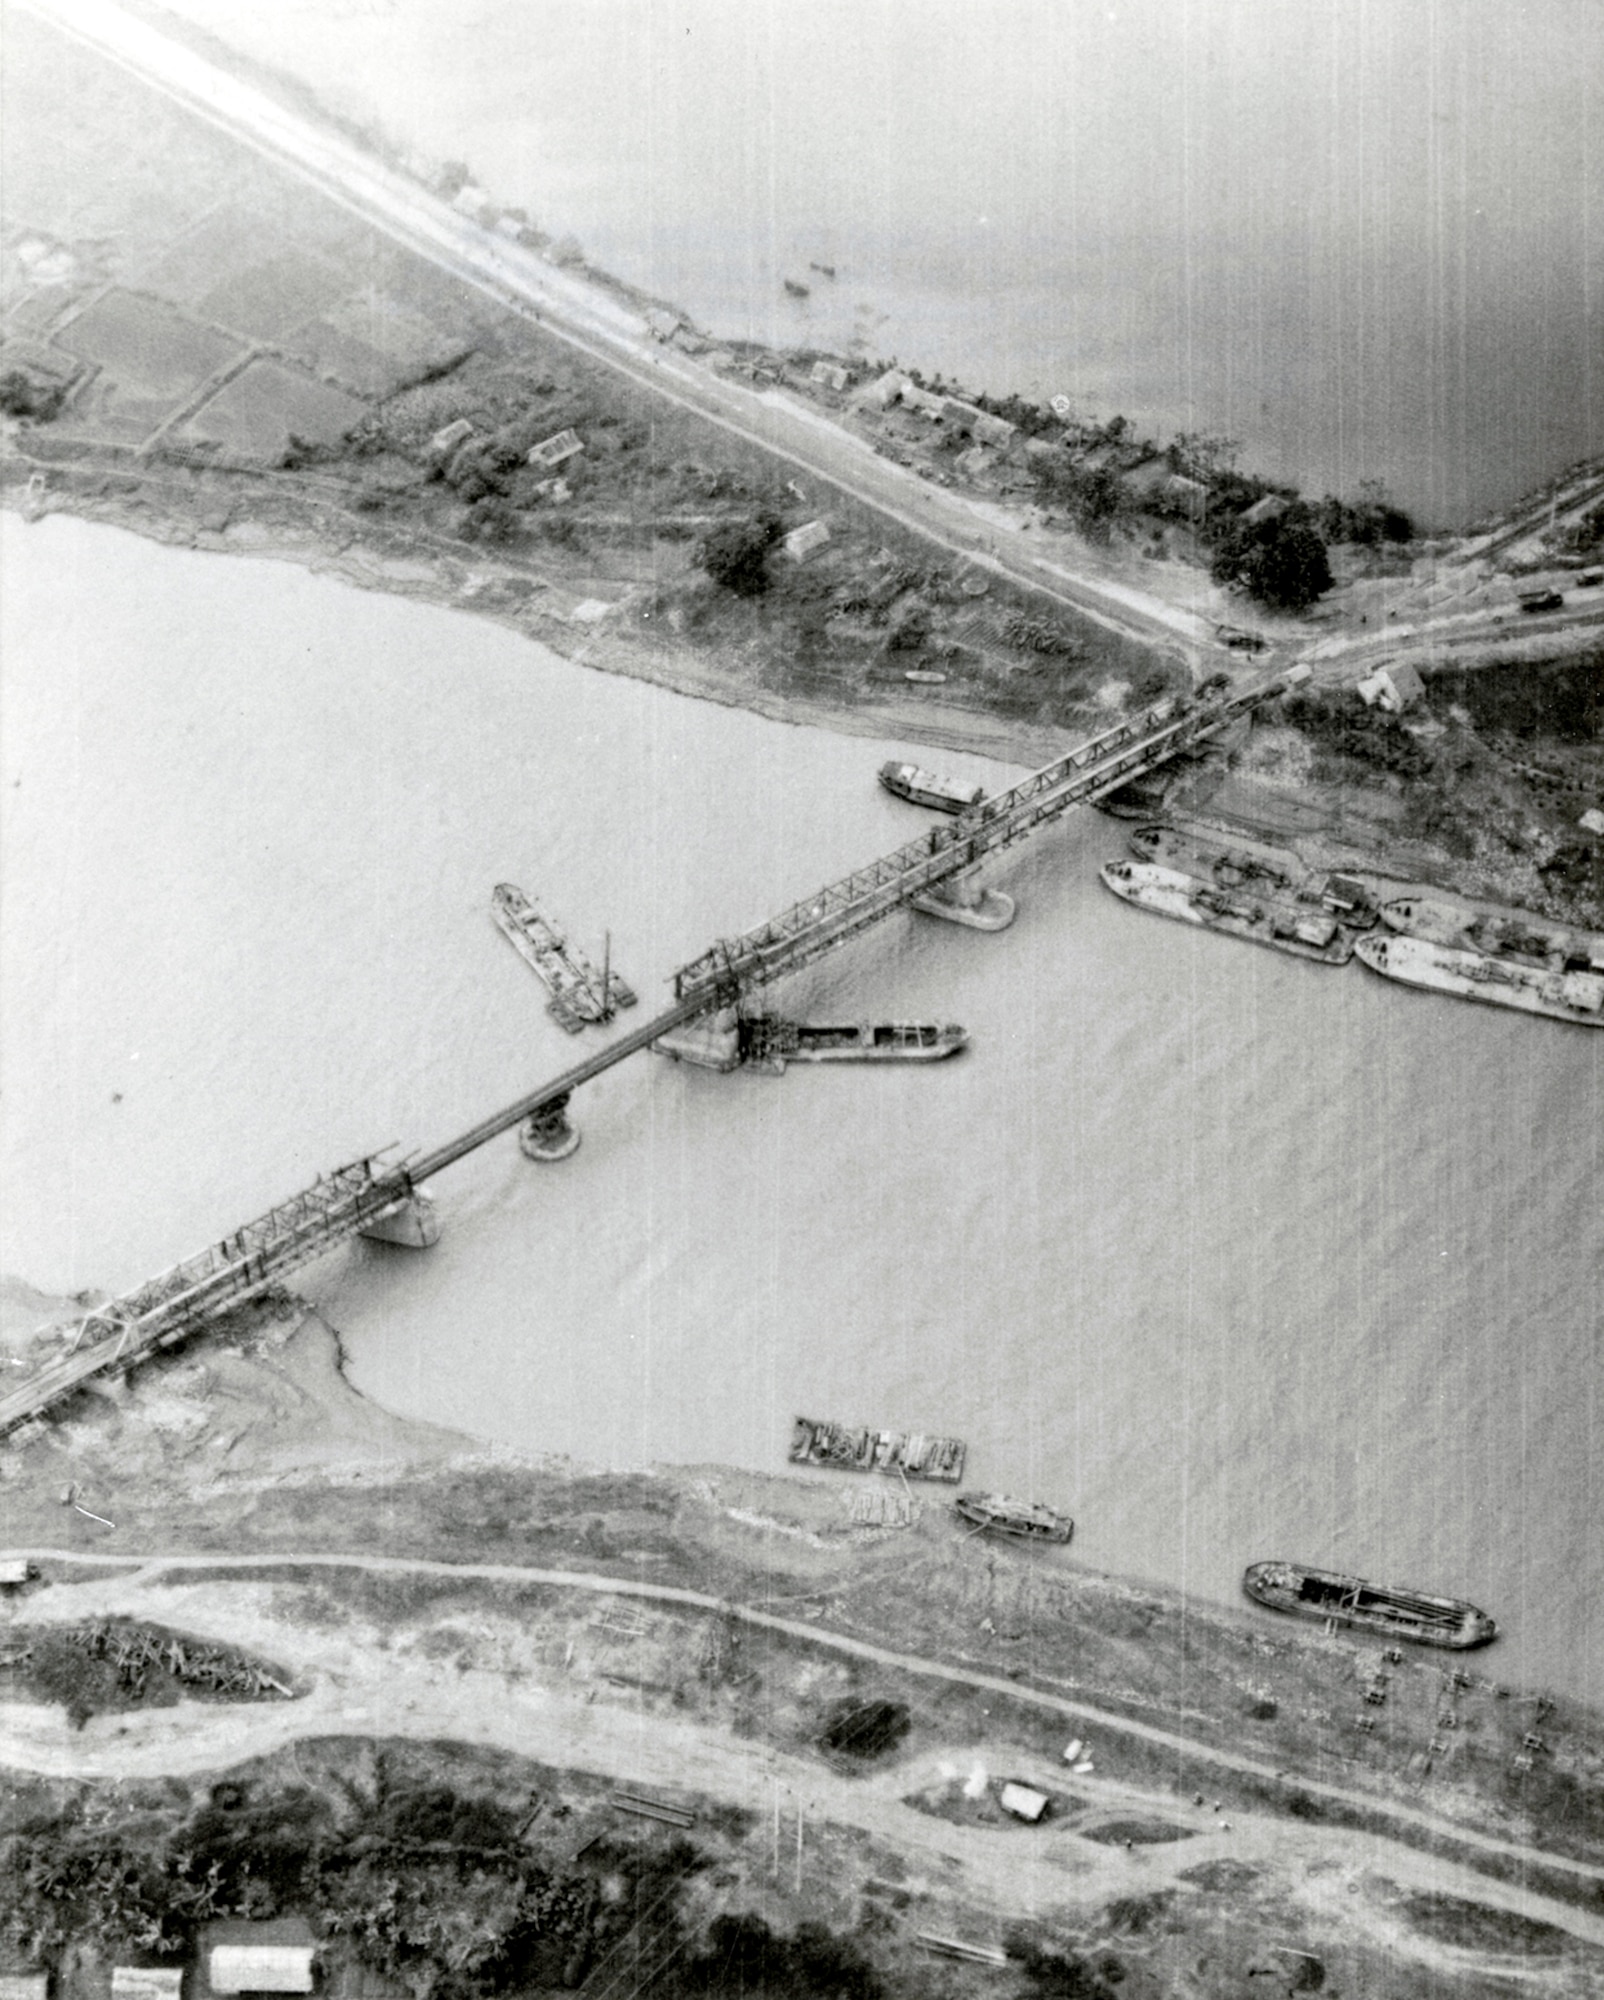 Enemy activity required constant monitoring. This December 1972 photo shows repairs to an important bridge just east of Hanoi, North Vietnam. It had been bombed earlier that year. (U.S. Air Force photo)